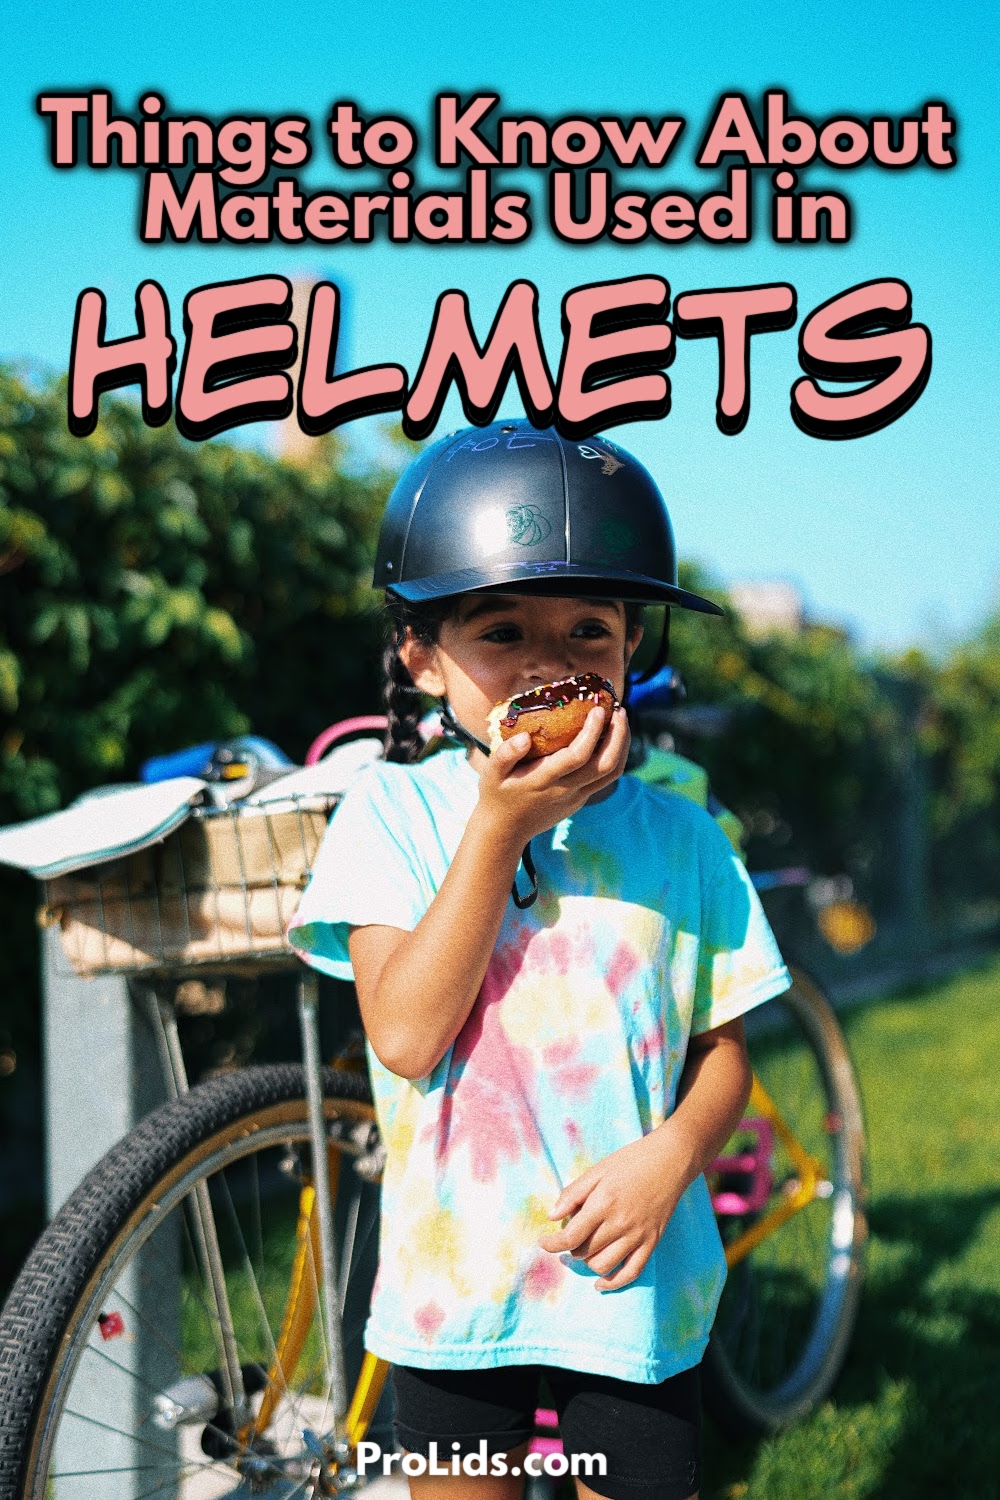 The important things to know about materials used in helmets can help us make better and safer decisions for ourselves and our kids.